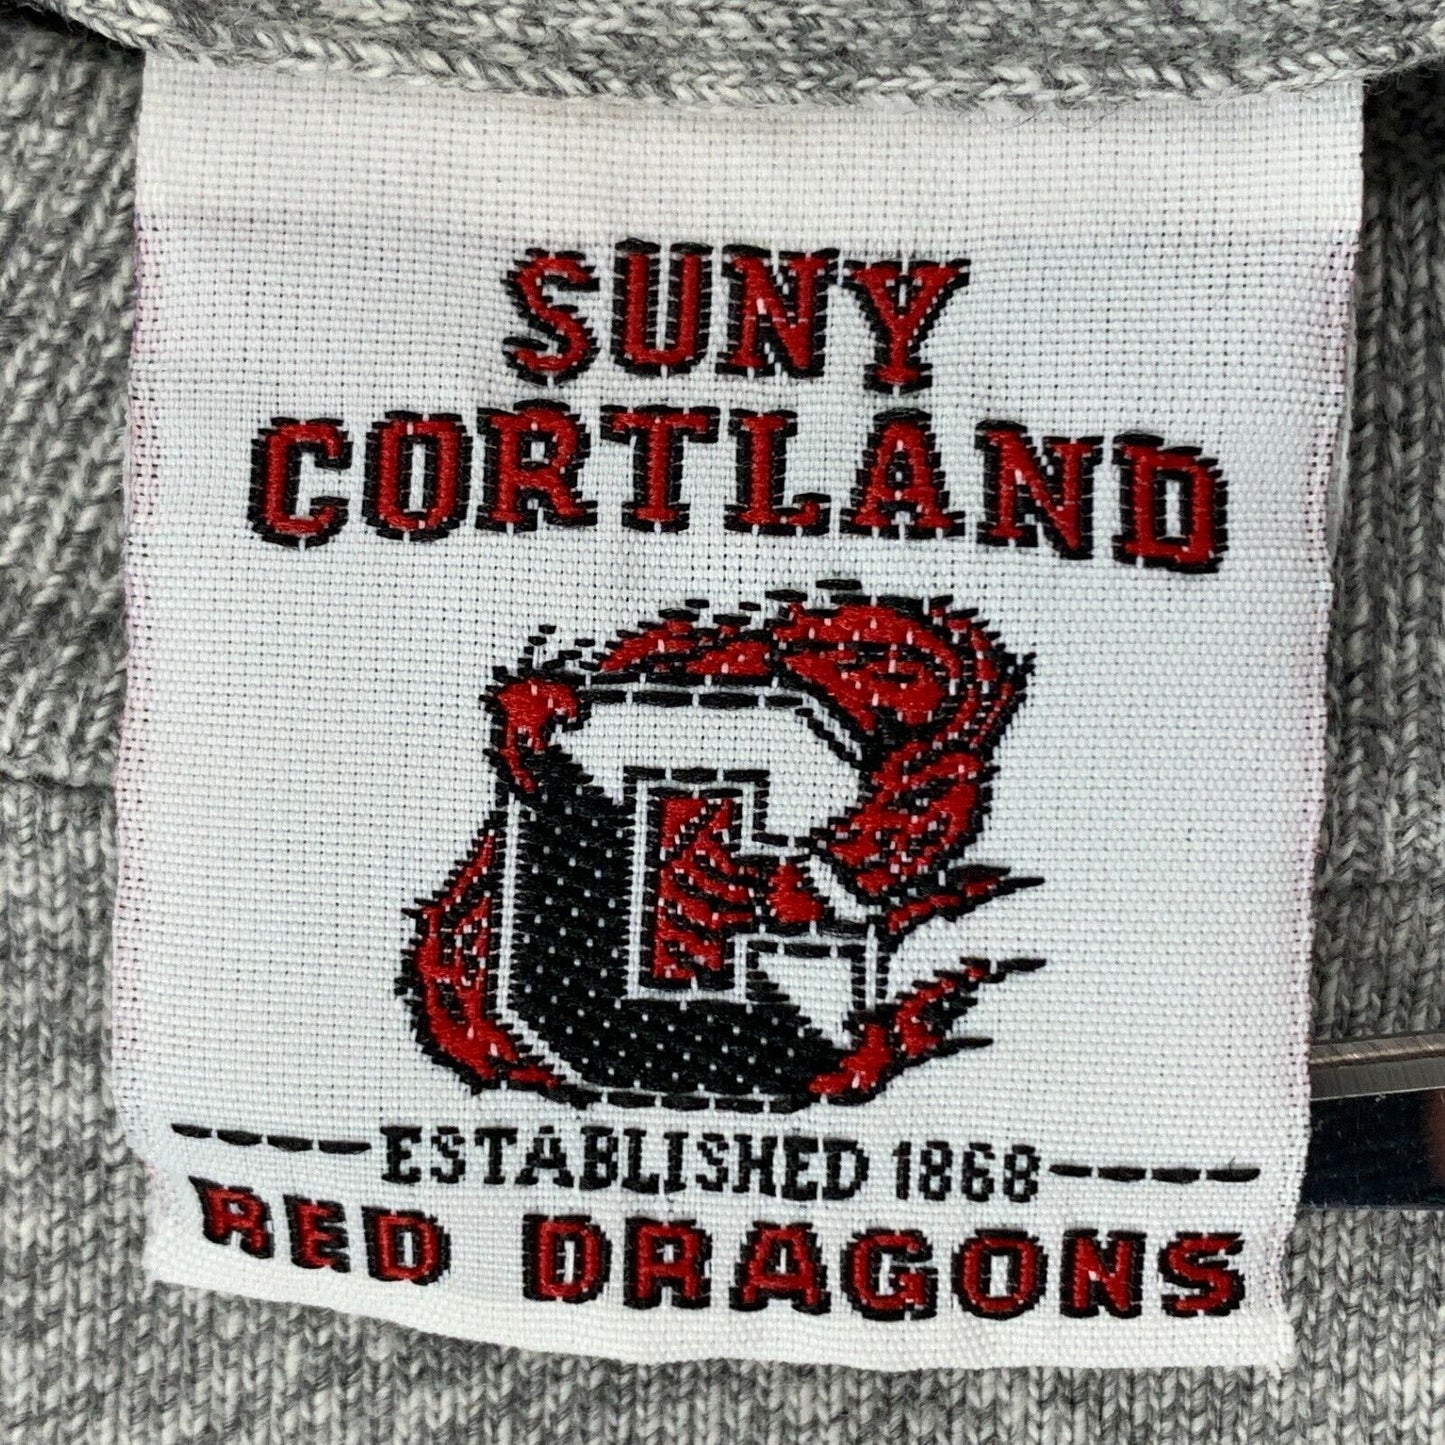 SUNY Cortland Rugby Vintage 90s T Shirt Red Dragons University New York Large